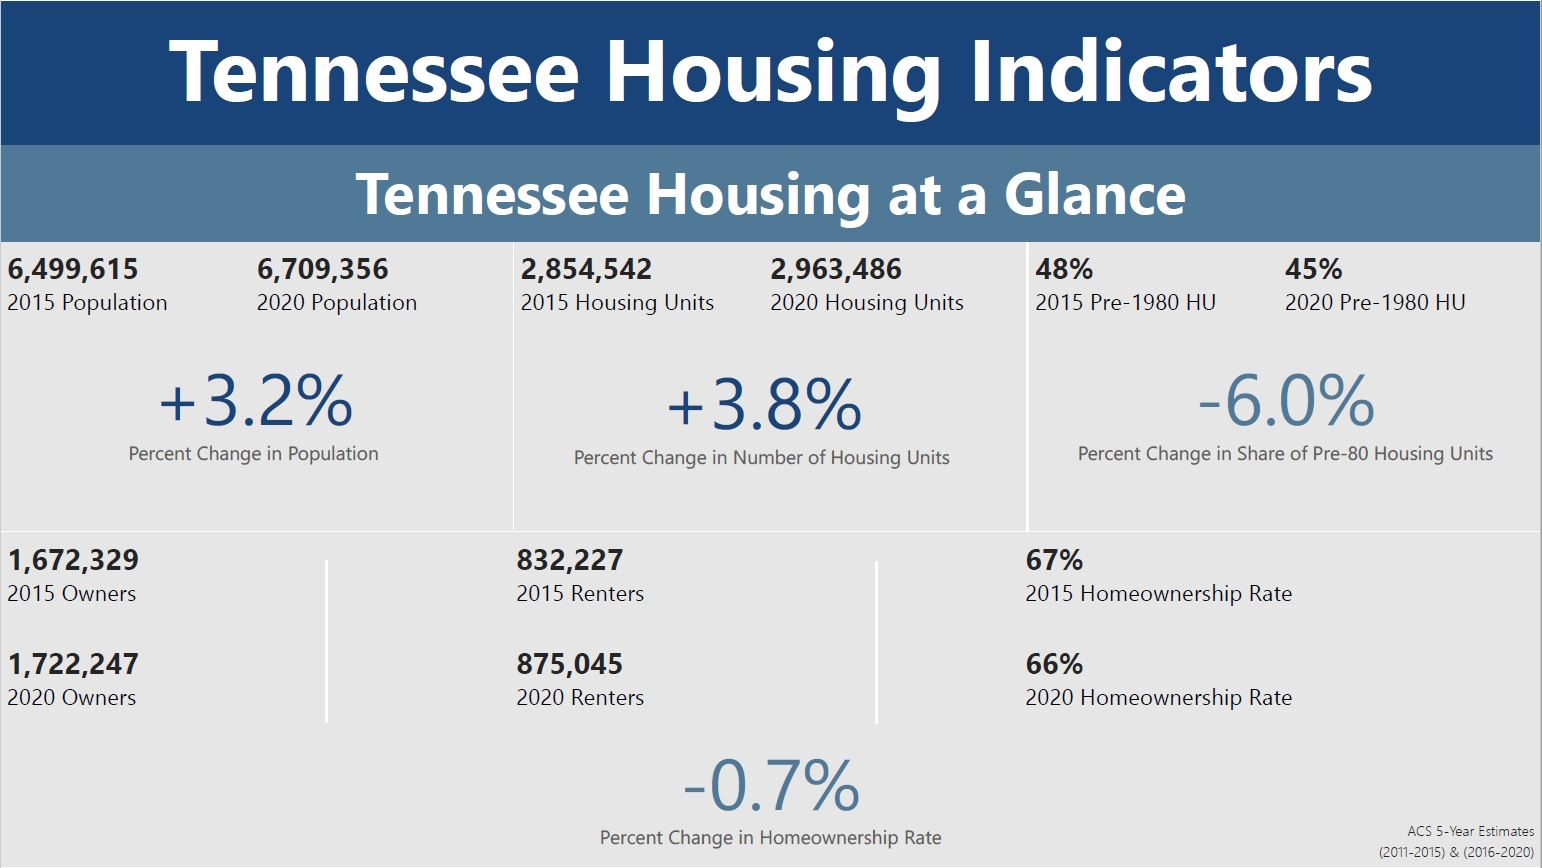 Tennessee housing at a glance